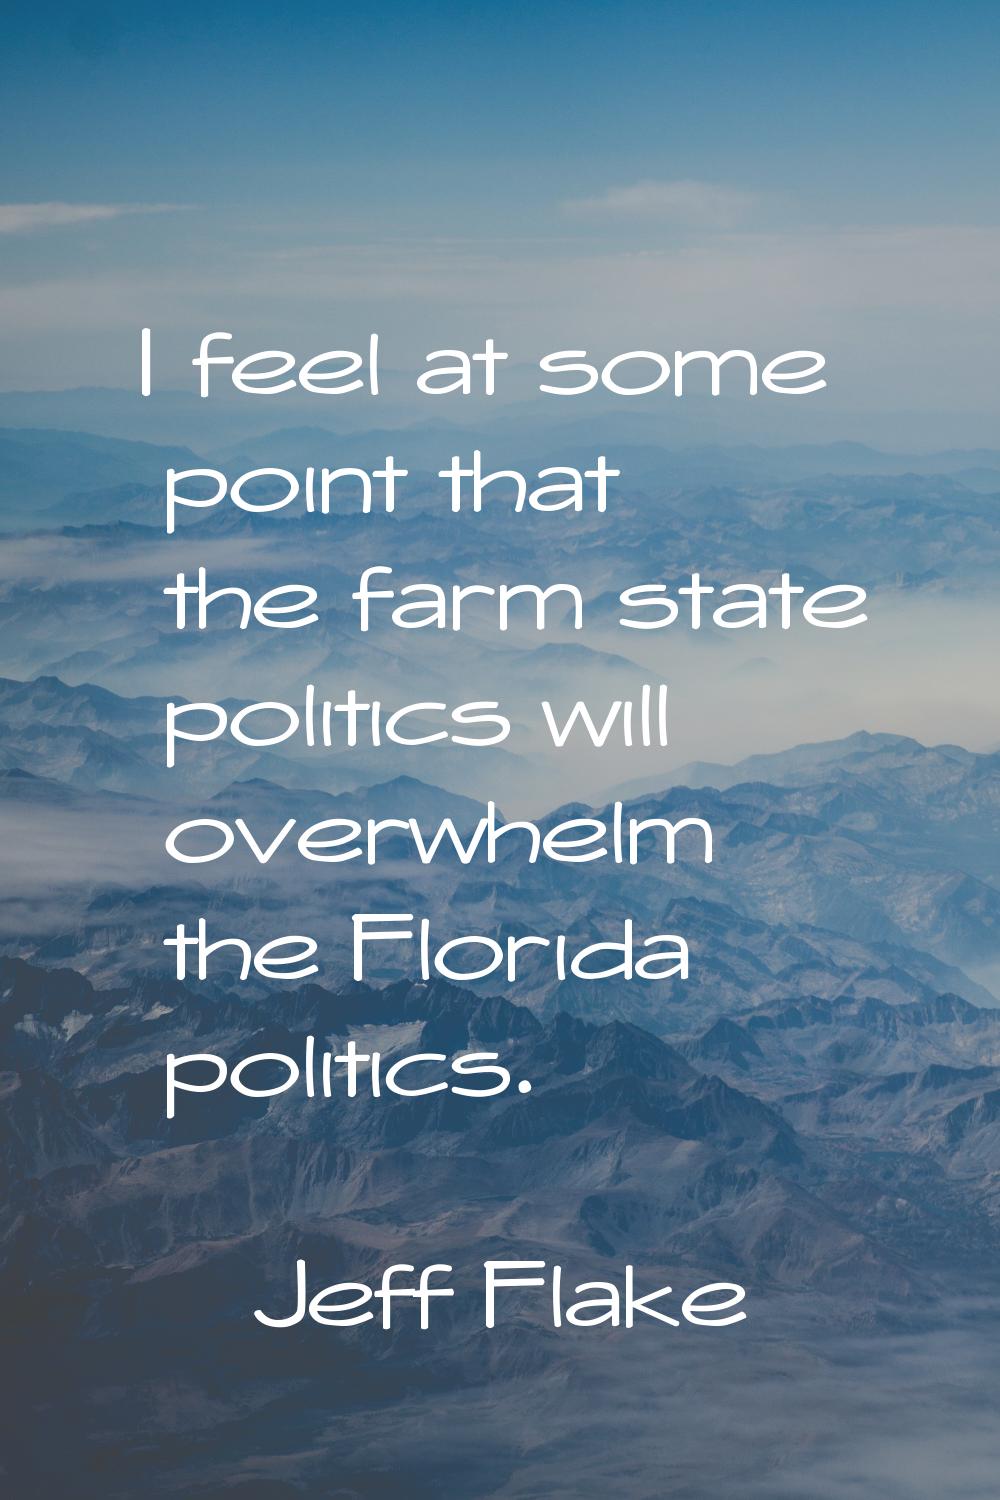 I feel at some point that the farm state politics will overwhelm the Florida politics.